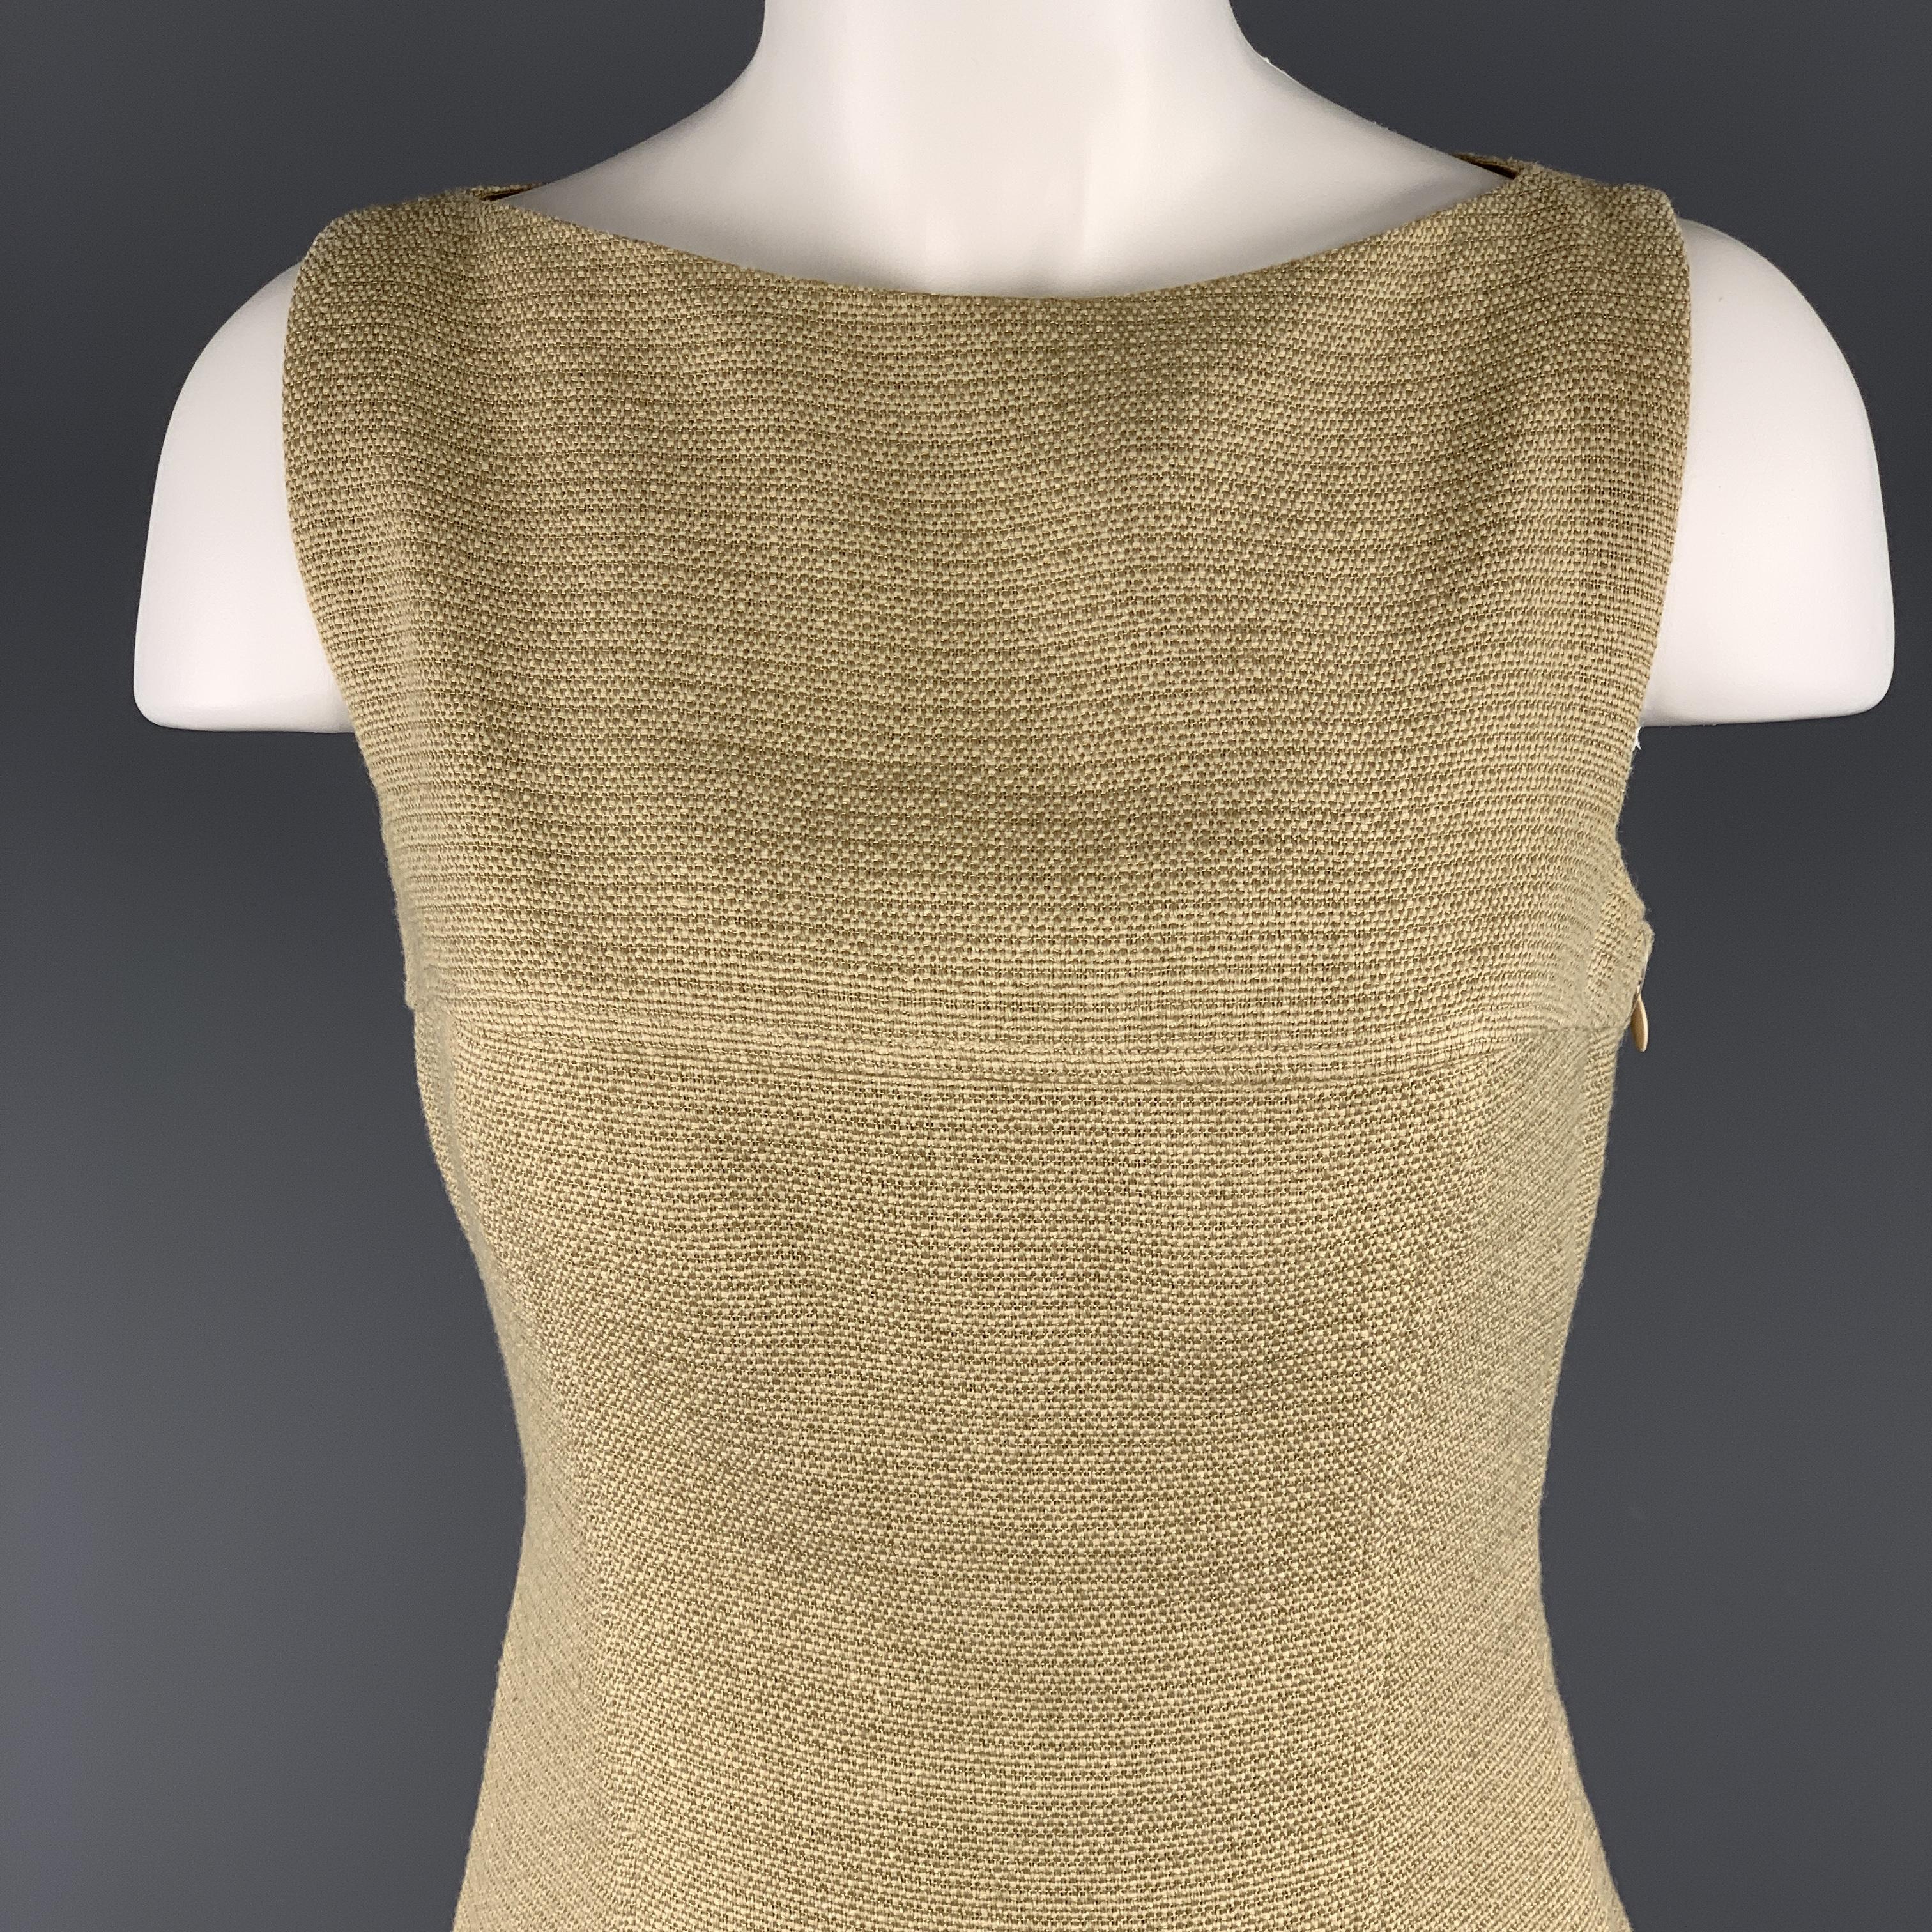 Sleeveless RALPH LAUREN BLACK LABEL shift dress comes in beige linen blend woven micro tweed with metallic gold foil stripe throughout, boat neckline, and silk liner. 

Excellent Pre-Owned Condition.
Marked: 4 

Measurements:

Shoulder: 13 in.
Bust: